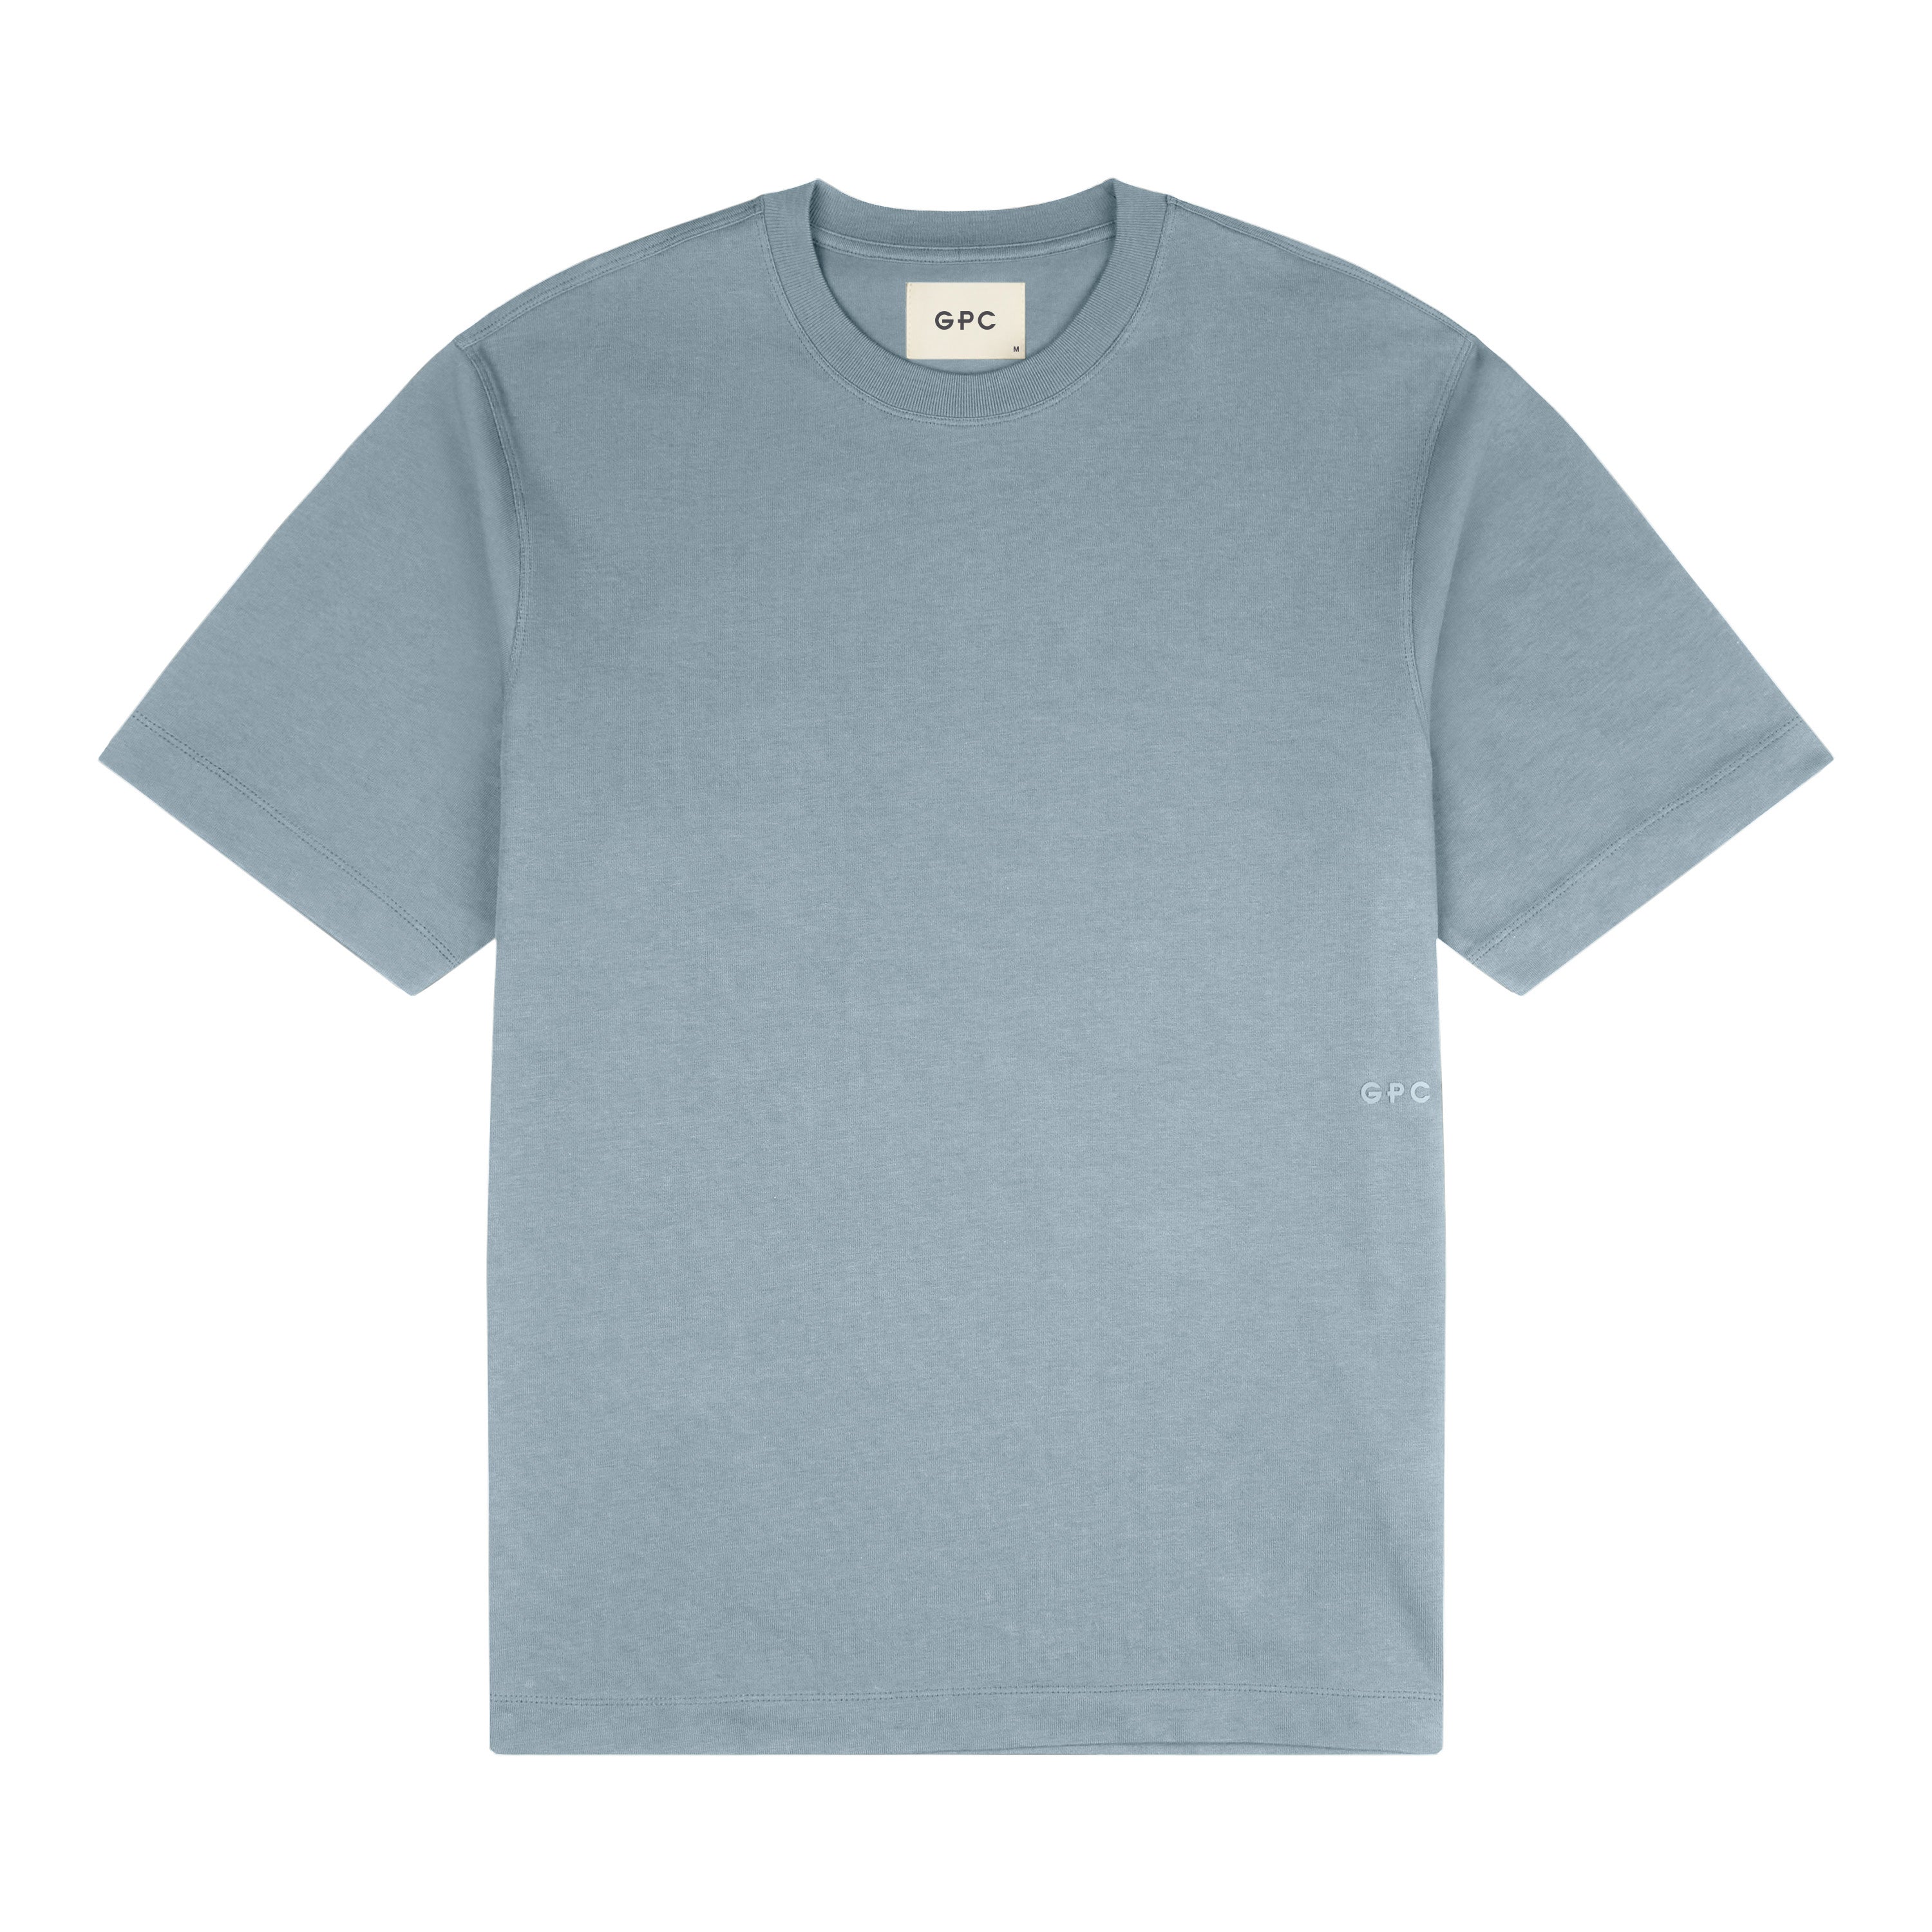 The Tee in Chalk Blue